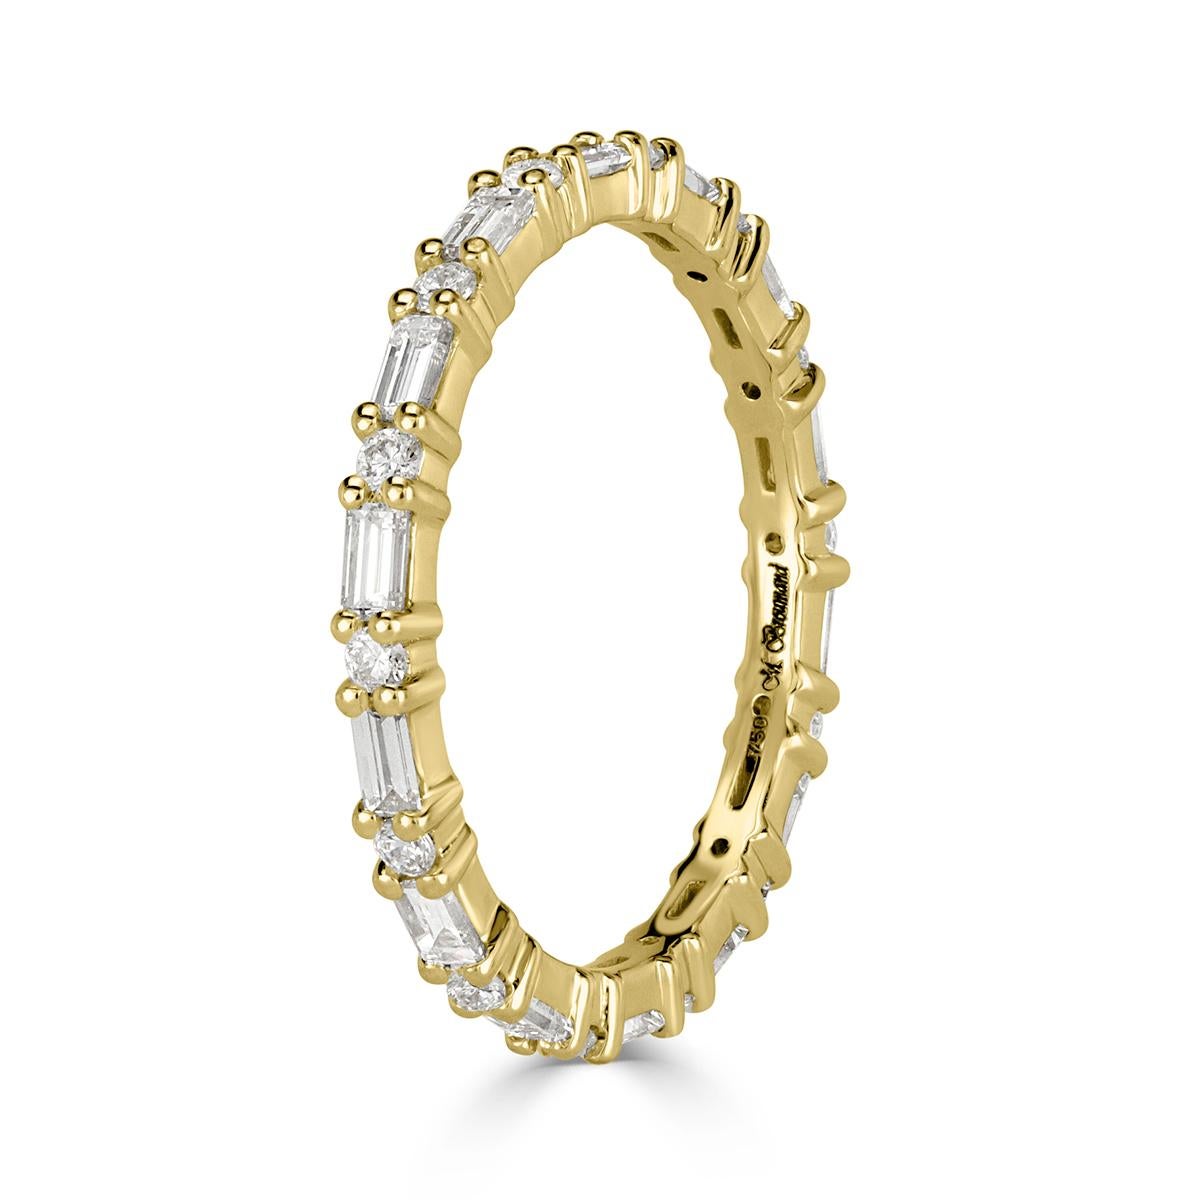 This 18k yellow gold eternity band is beautiful as a stand-alone piece or stacked with other signature Mark Broumand pieces. It showcases 0.77ct of shimmering baguette and round brilliant cut diamonds set in an alternating design. The diamonds are